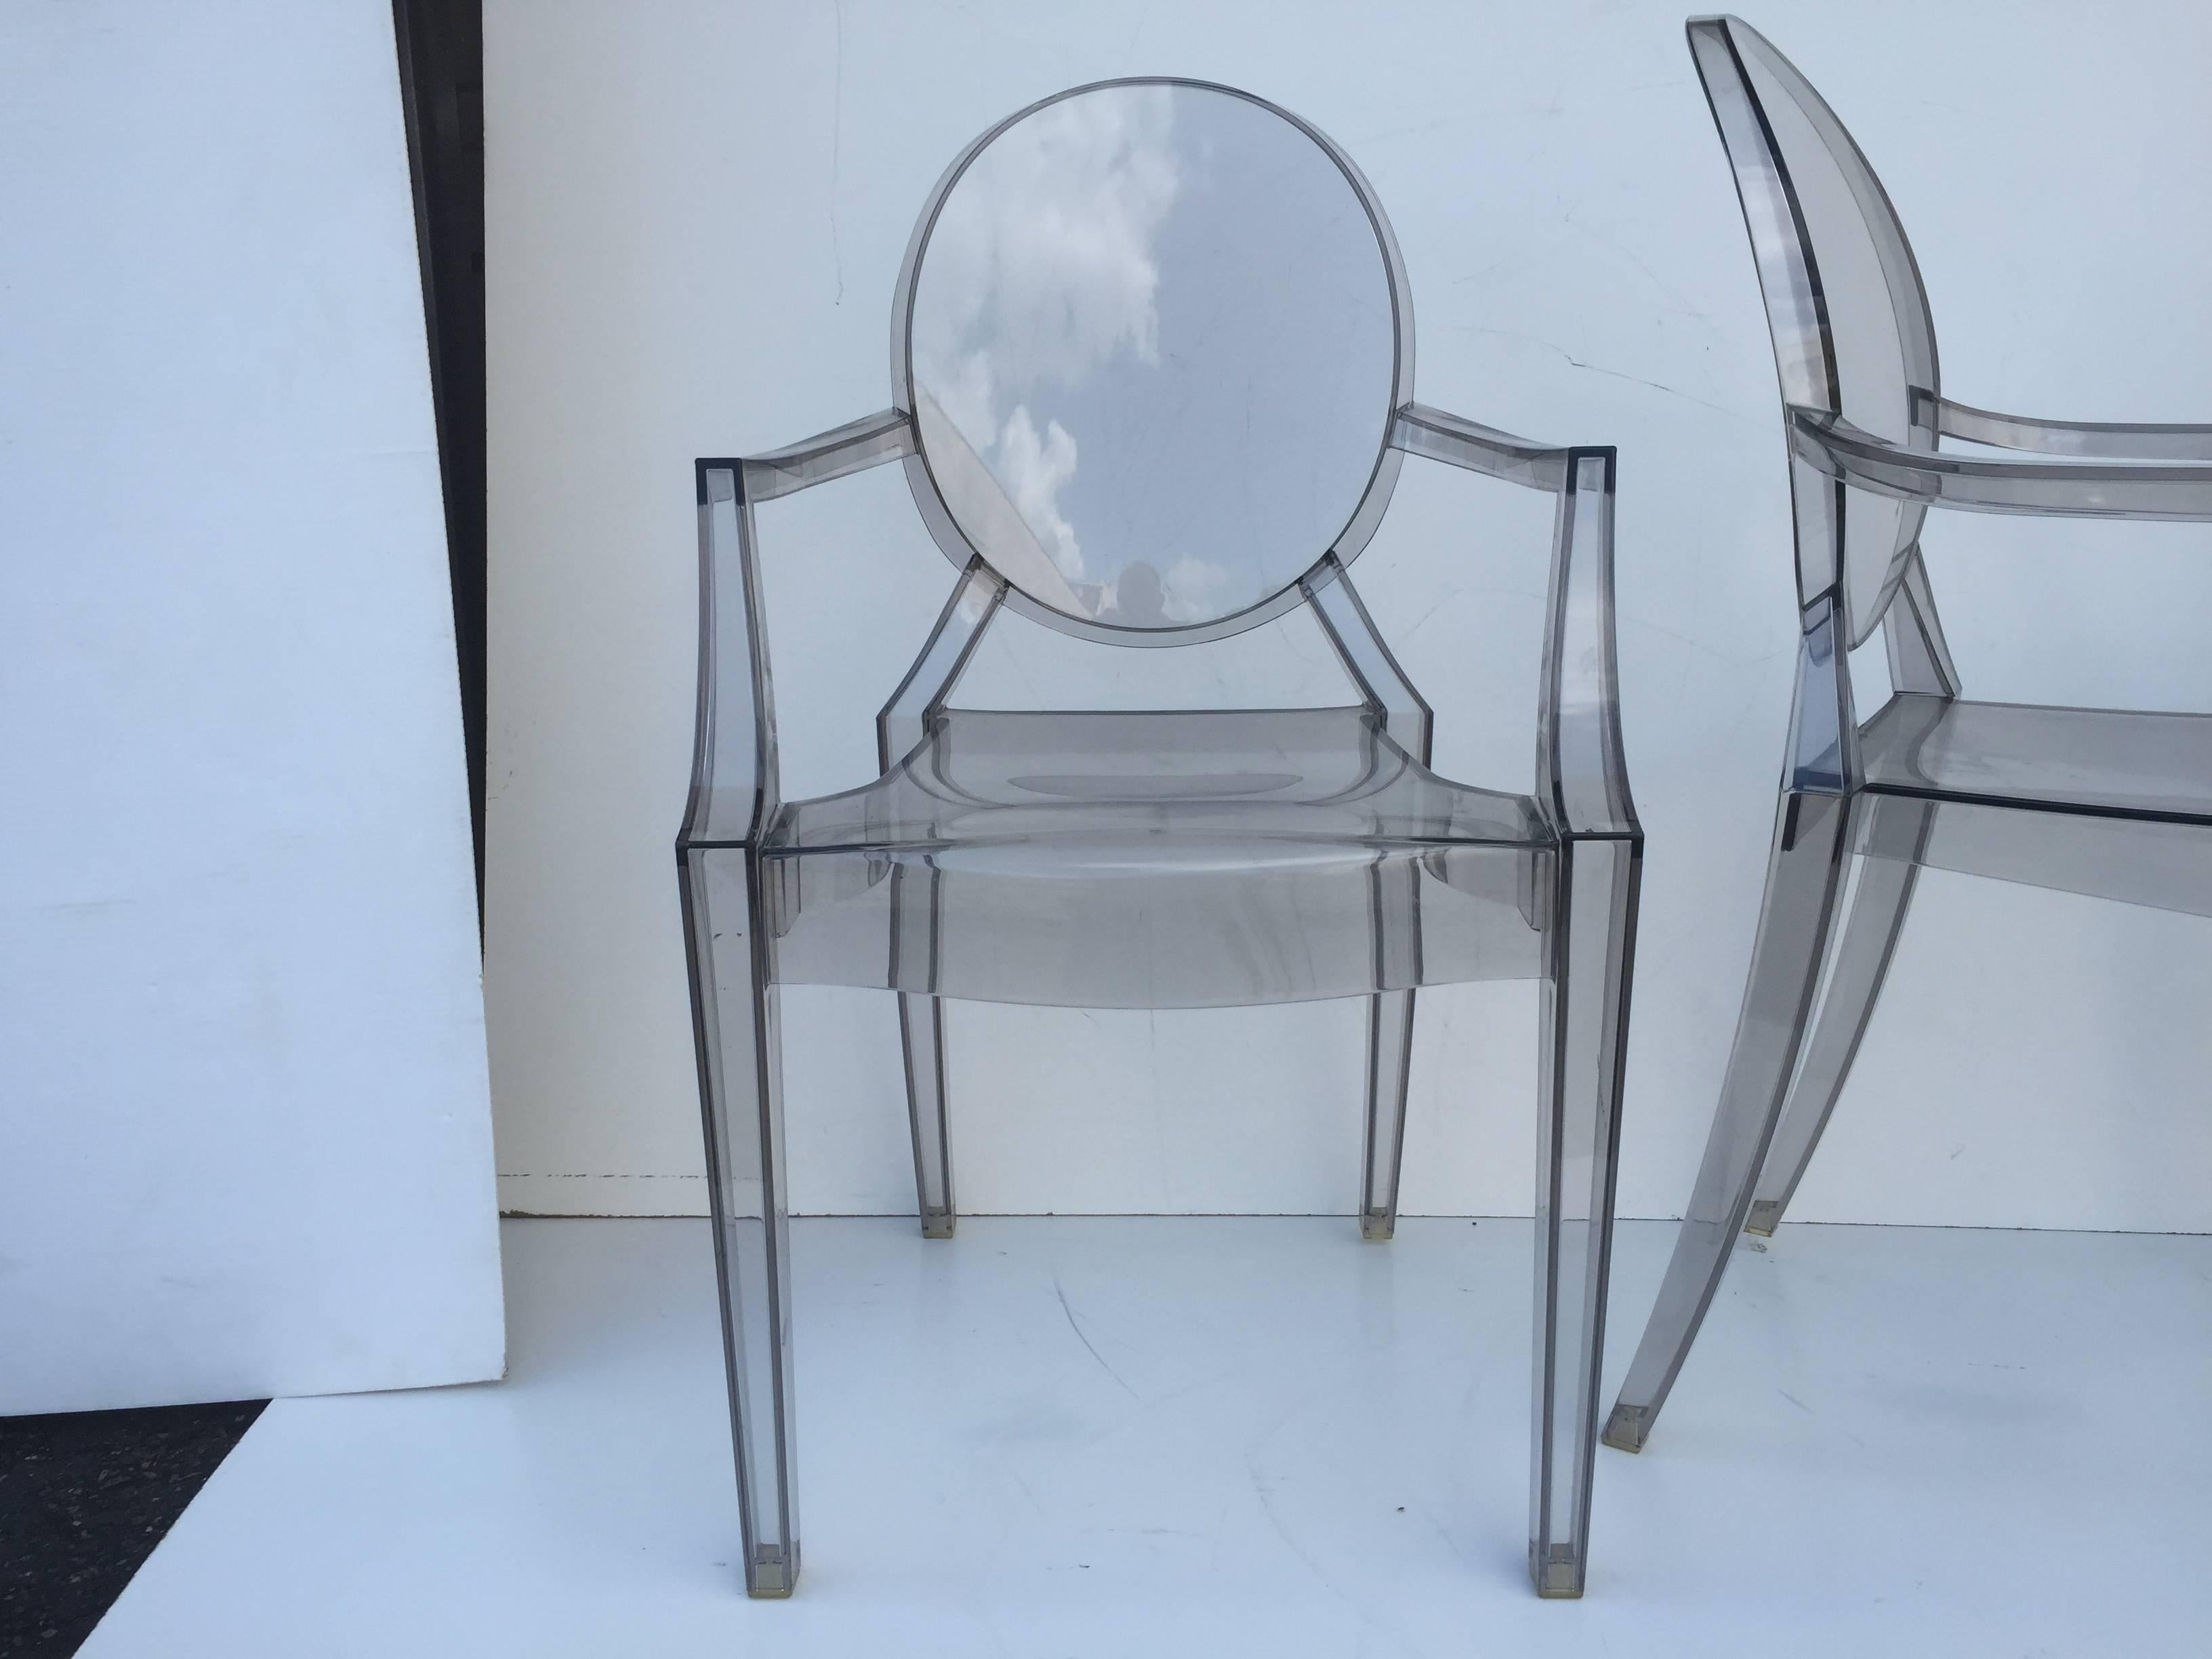 Smoked Lucite individual Philippe Starck or as set of three-arm Louis Ghost and pair of side Victoria Ghost chairs by Kartell available individually. Armchairs measures: D 21.5 H 36.75 W 19 S 19 A 27 all 3 39.25 side chairs: D 19.25 W 15.25 H 35.75